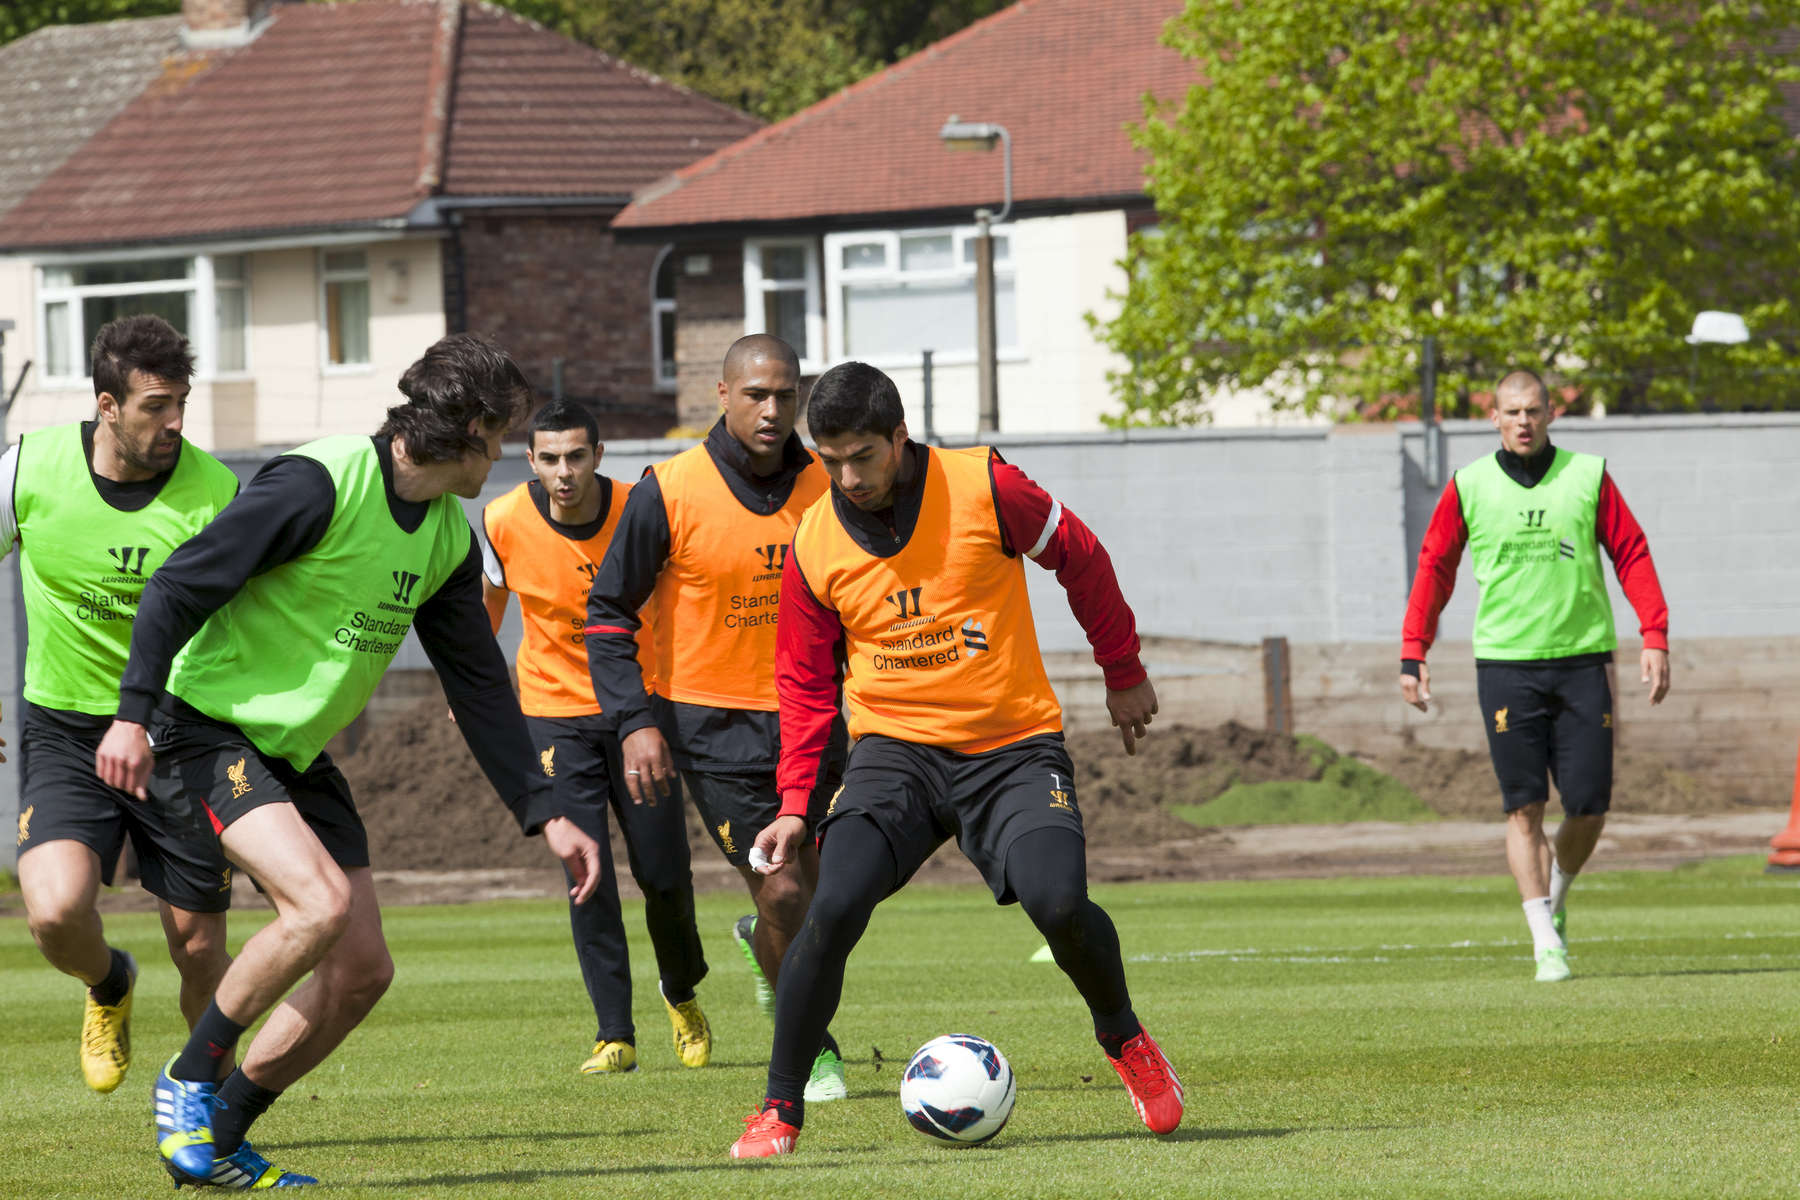 Liverpool FC striker Luis Suarez during training for the cllub at Melwood.Melwood is the Liverpool FC training ground, located in the West Derby area of Liverpool. It is seperate from the Liverpool Academy, which is based in Kirkby.Melwood was redeveloped in the early 2000′s with large input from then-manager Gerard Houllier and now features some of the best facilities in Europe. It has been the club’s training ground since the fifties and was previously transformed into a top class facility by Bill Shankly.Facilities include sythetic pitches, rehabilitation rooms, press and meeting rooms, gymnasium, swimming pool, restaurant and recreational facilities.